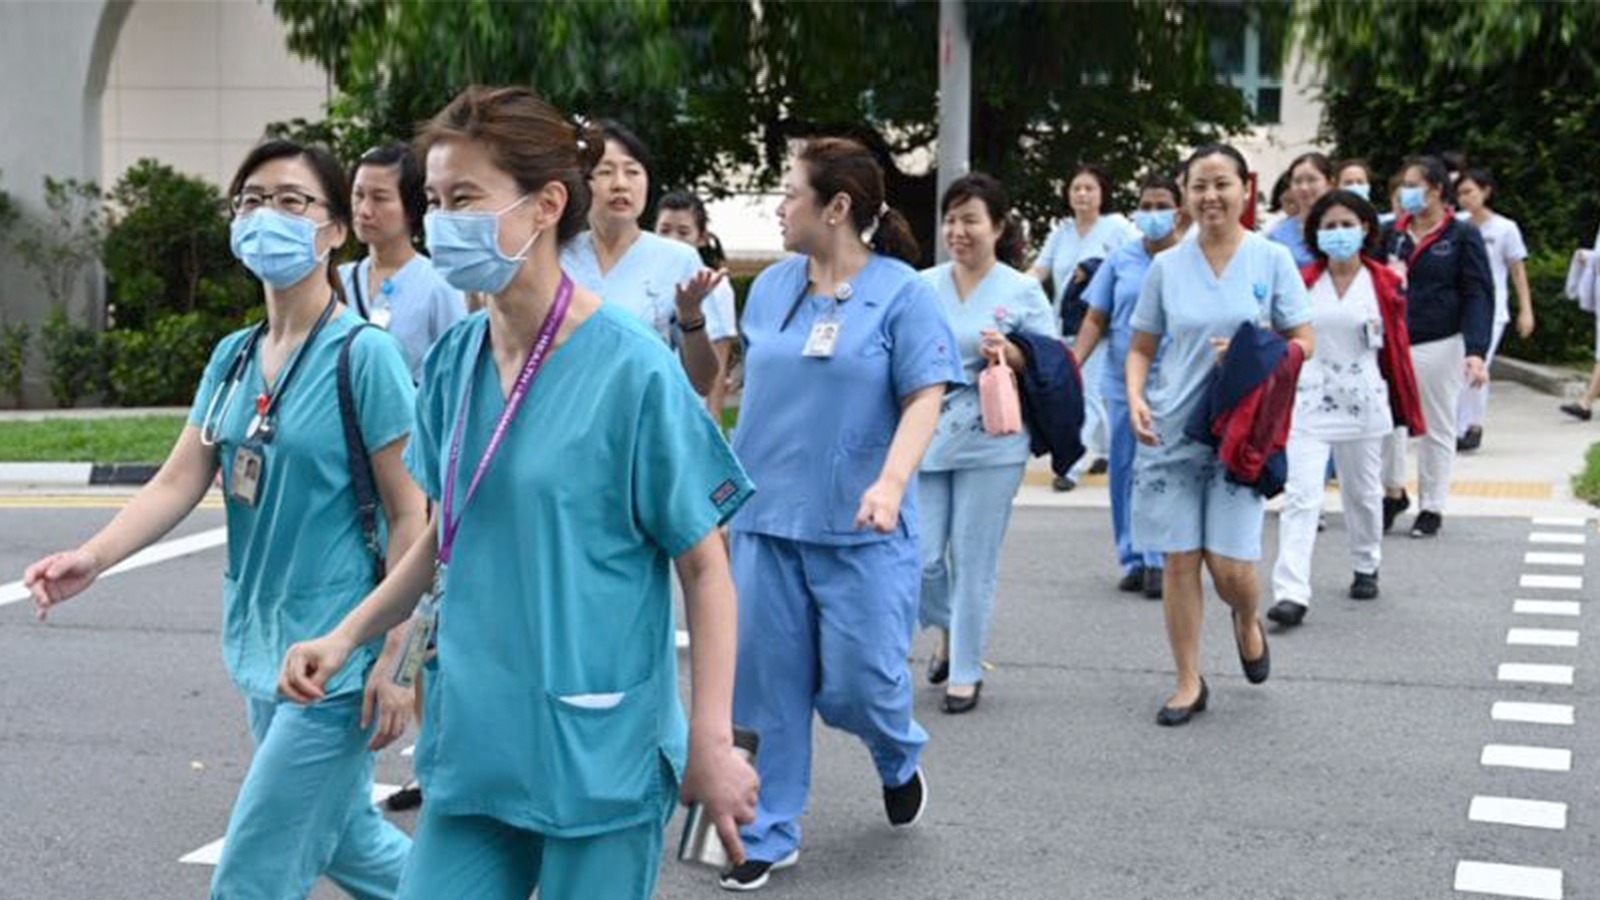 Coffee with words of encouragement for Singapore’s healthcare workers